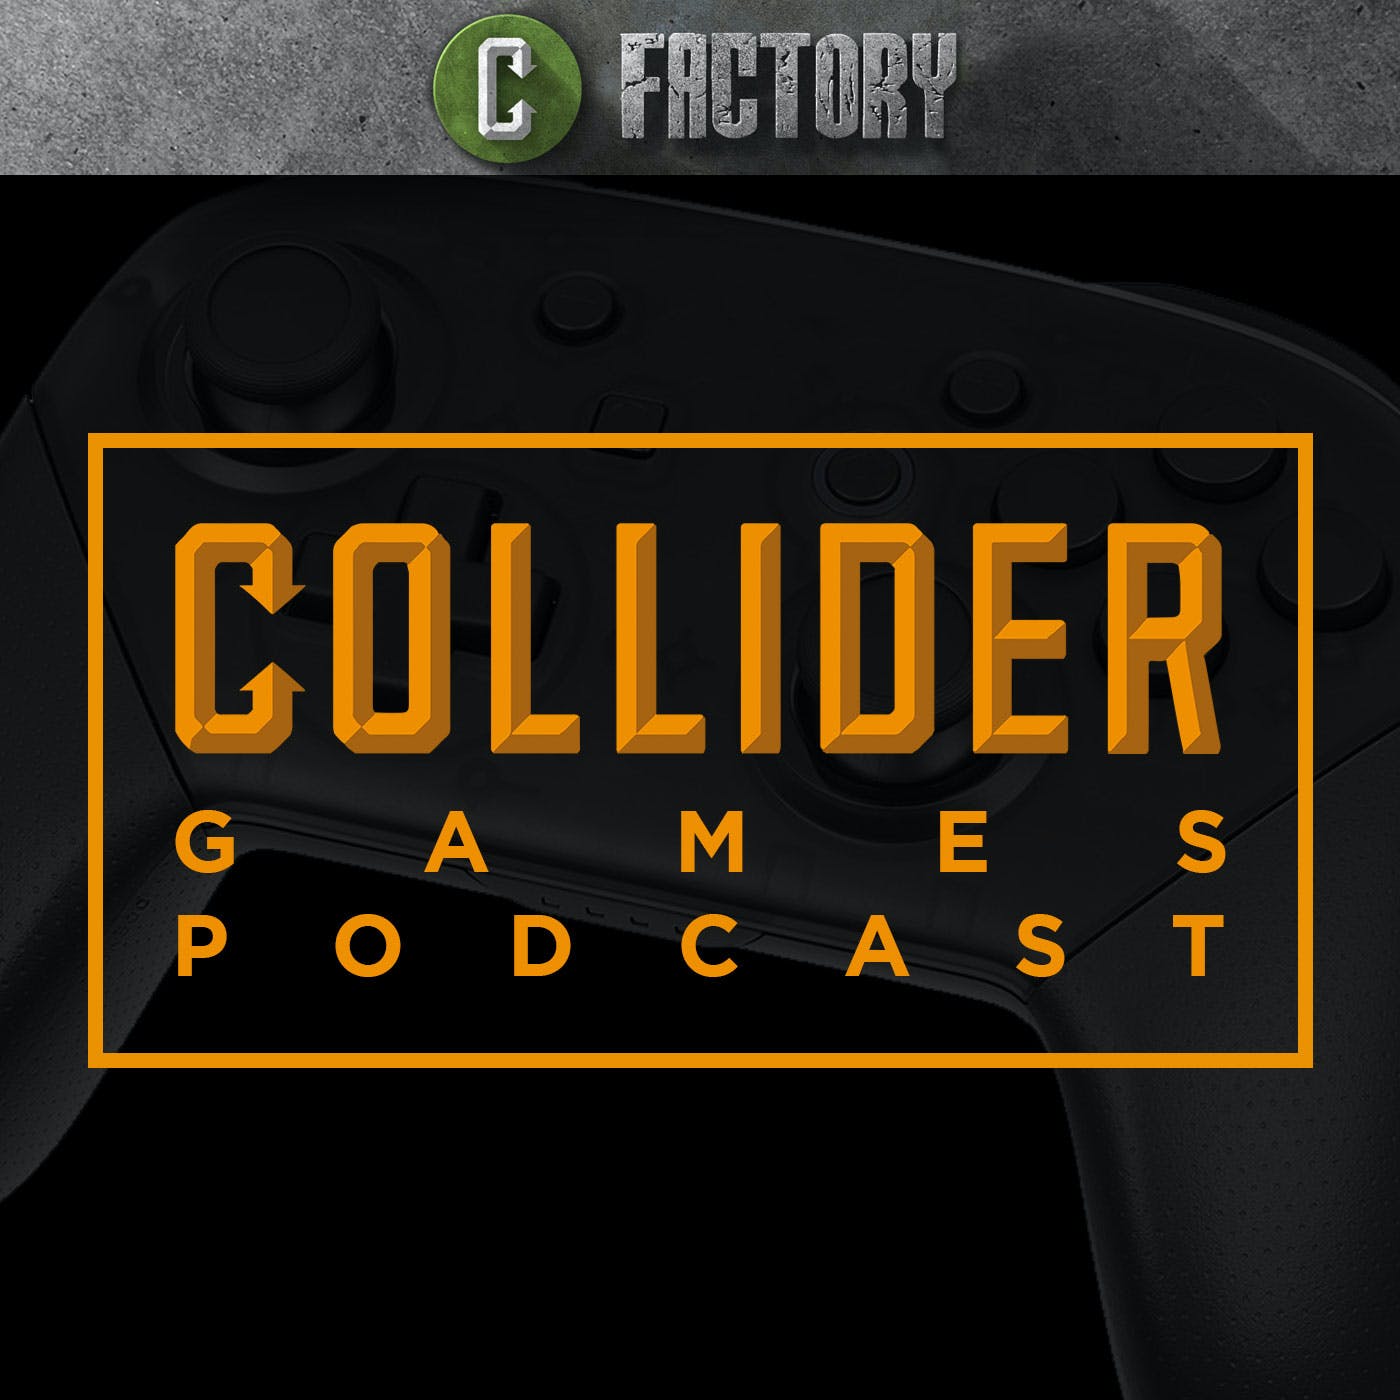 Which of the Biggest 2020 Games Are You Looking Forward to the Most? - Collider Games Podcast